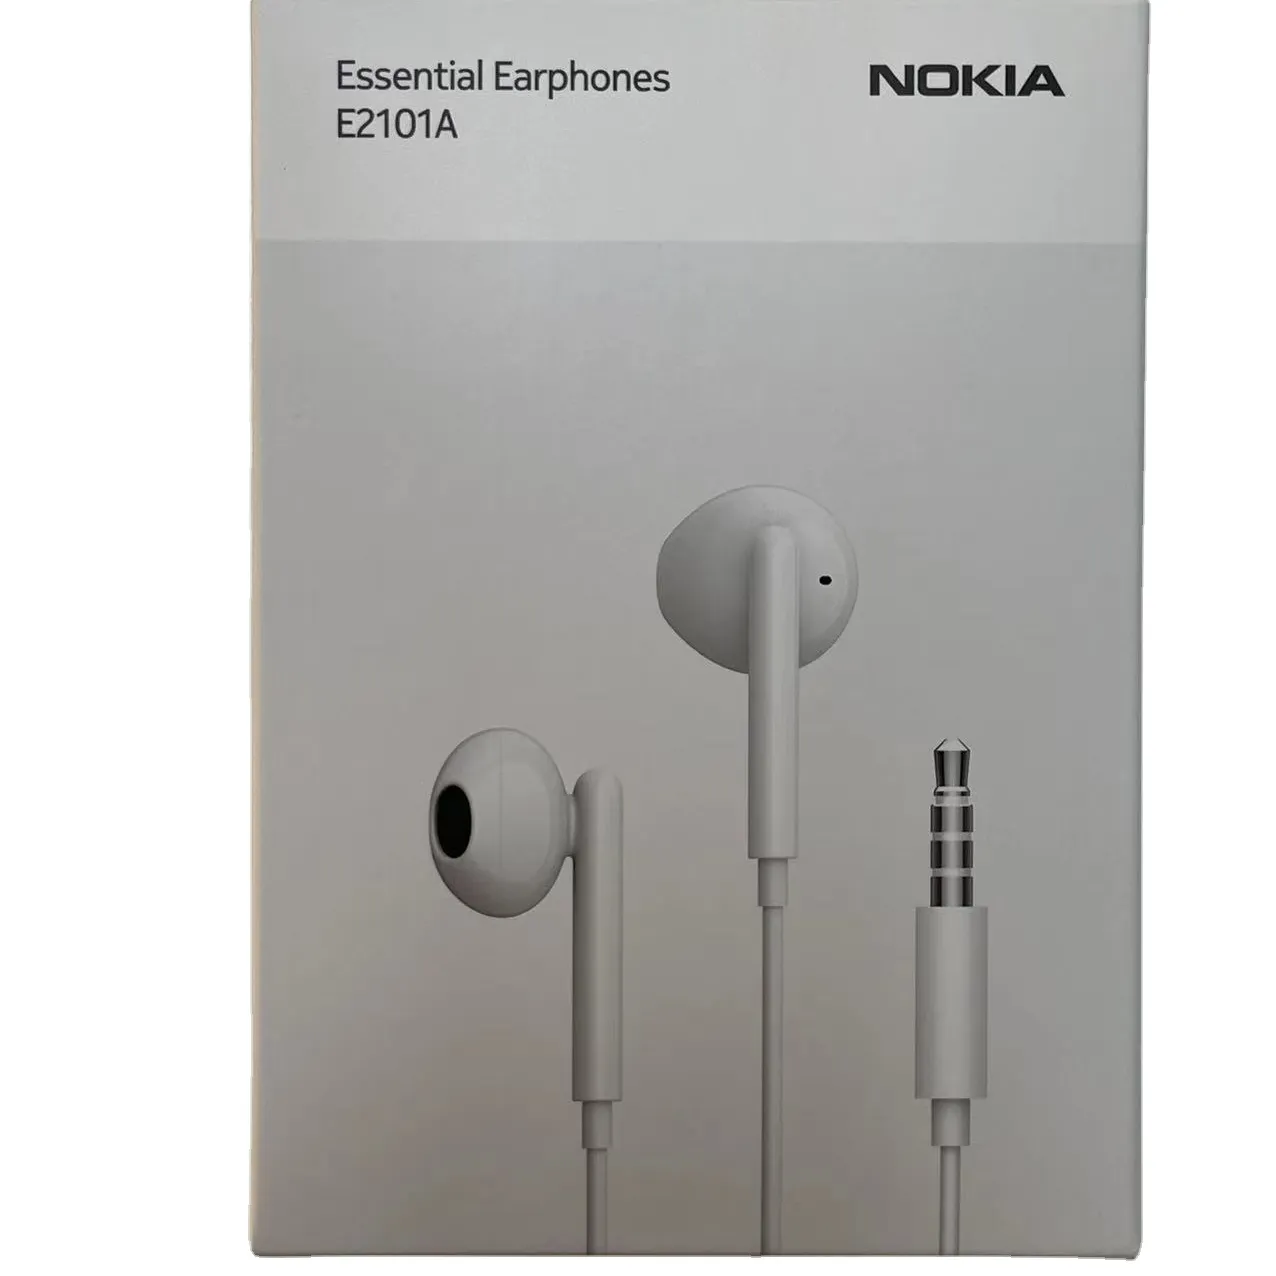 Nokia E2101A Wired 3.5mm Earphones Stereo Music Wired Headsets Gaming Earphone With Mic Volume Control